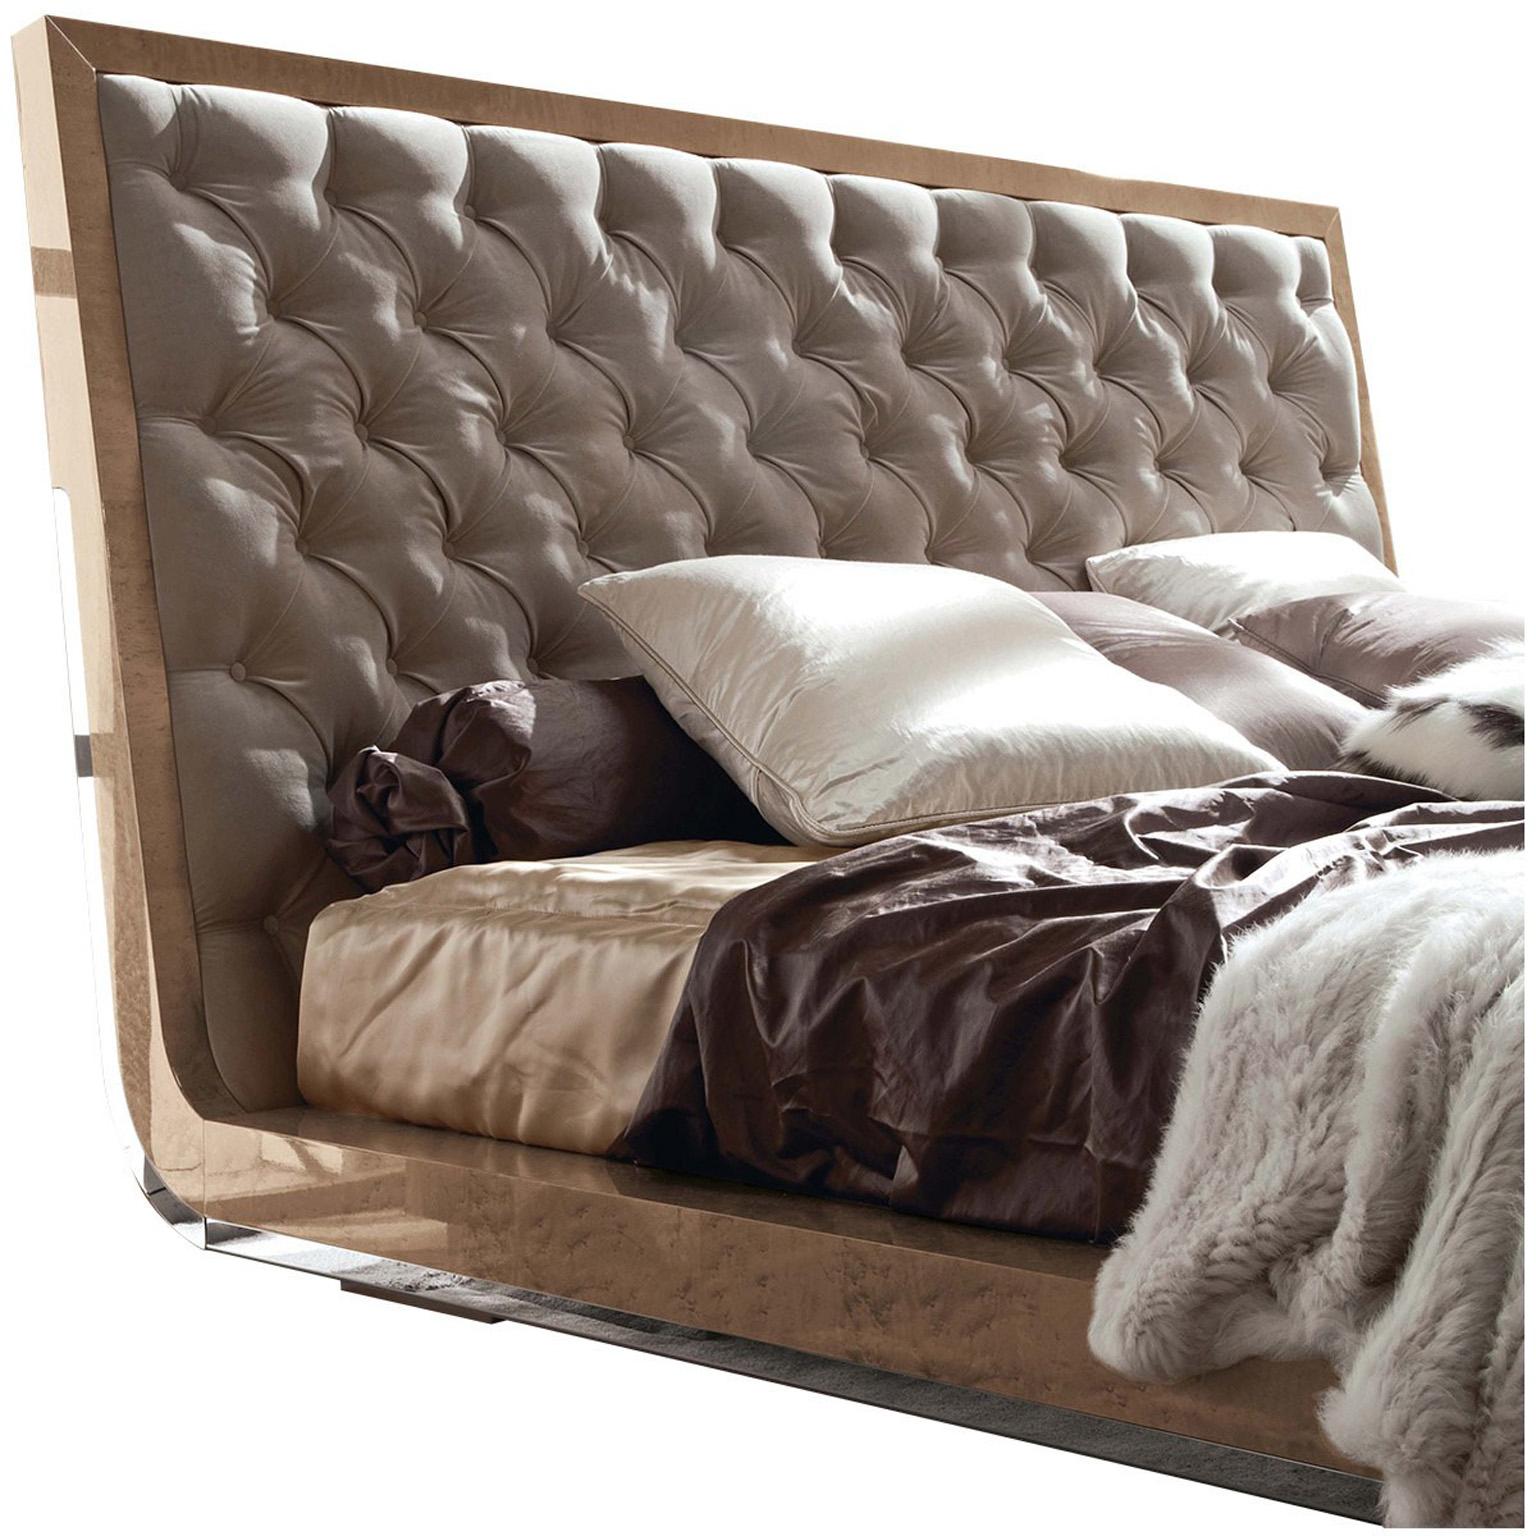 king size wood and leather headboard